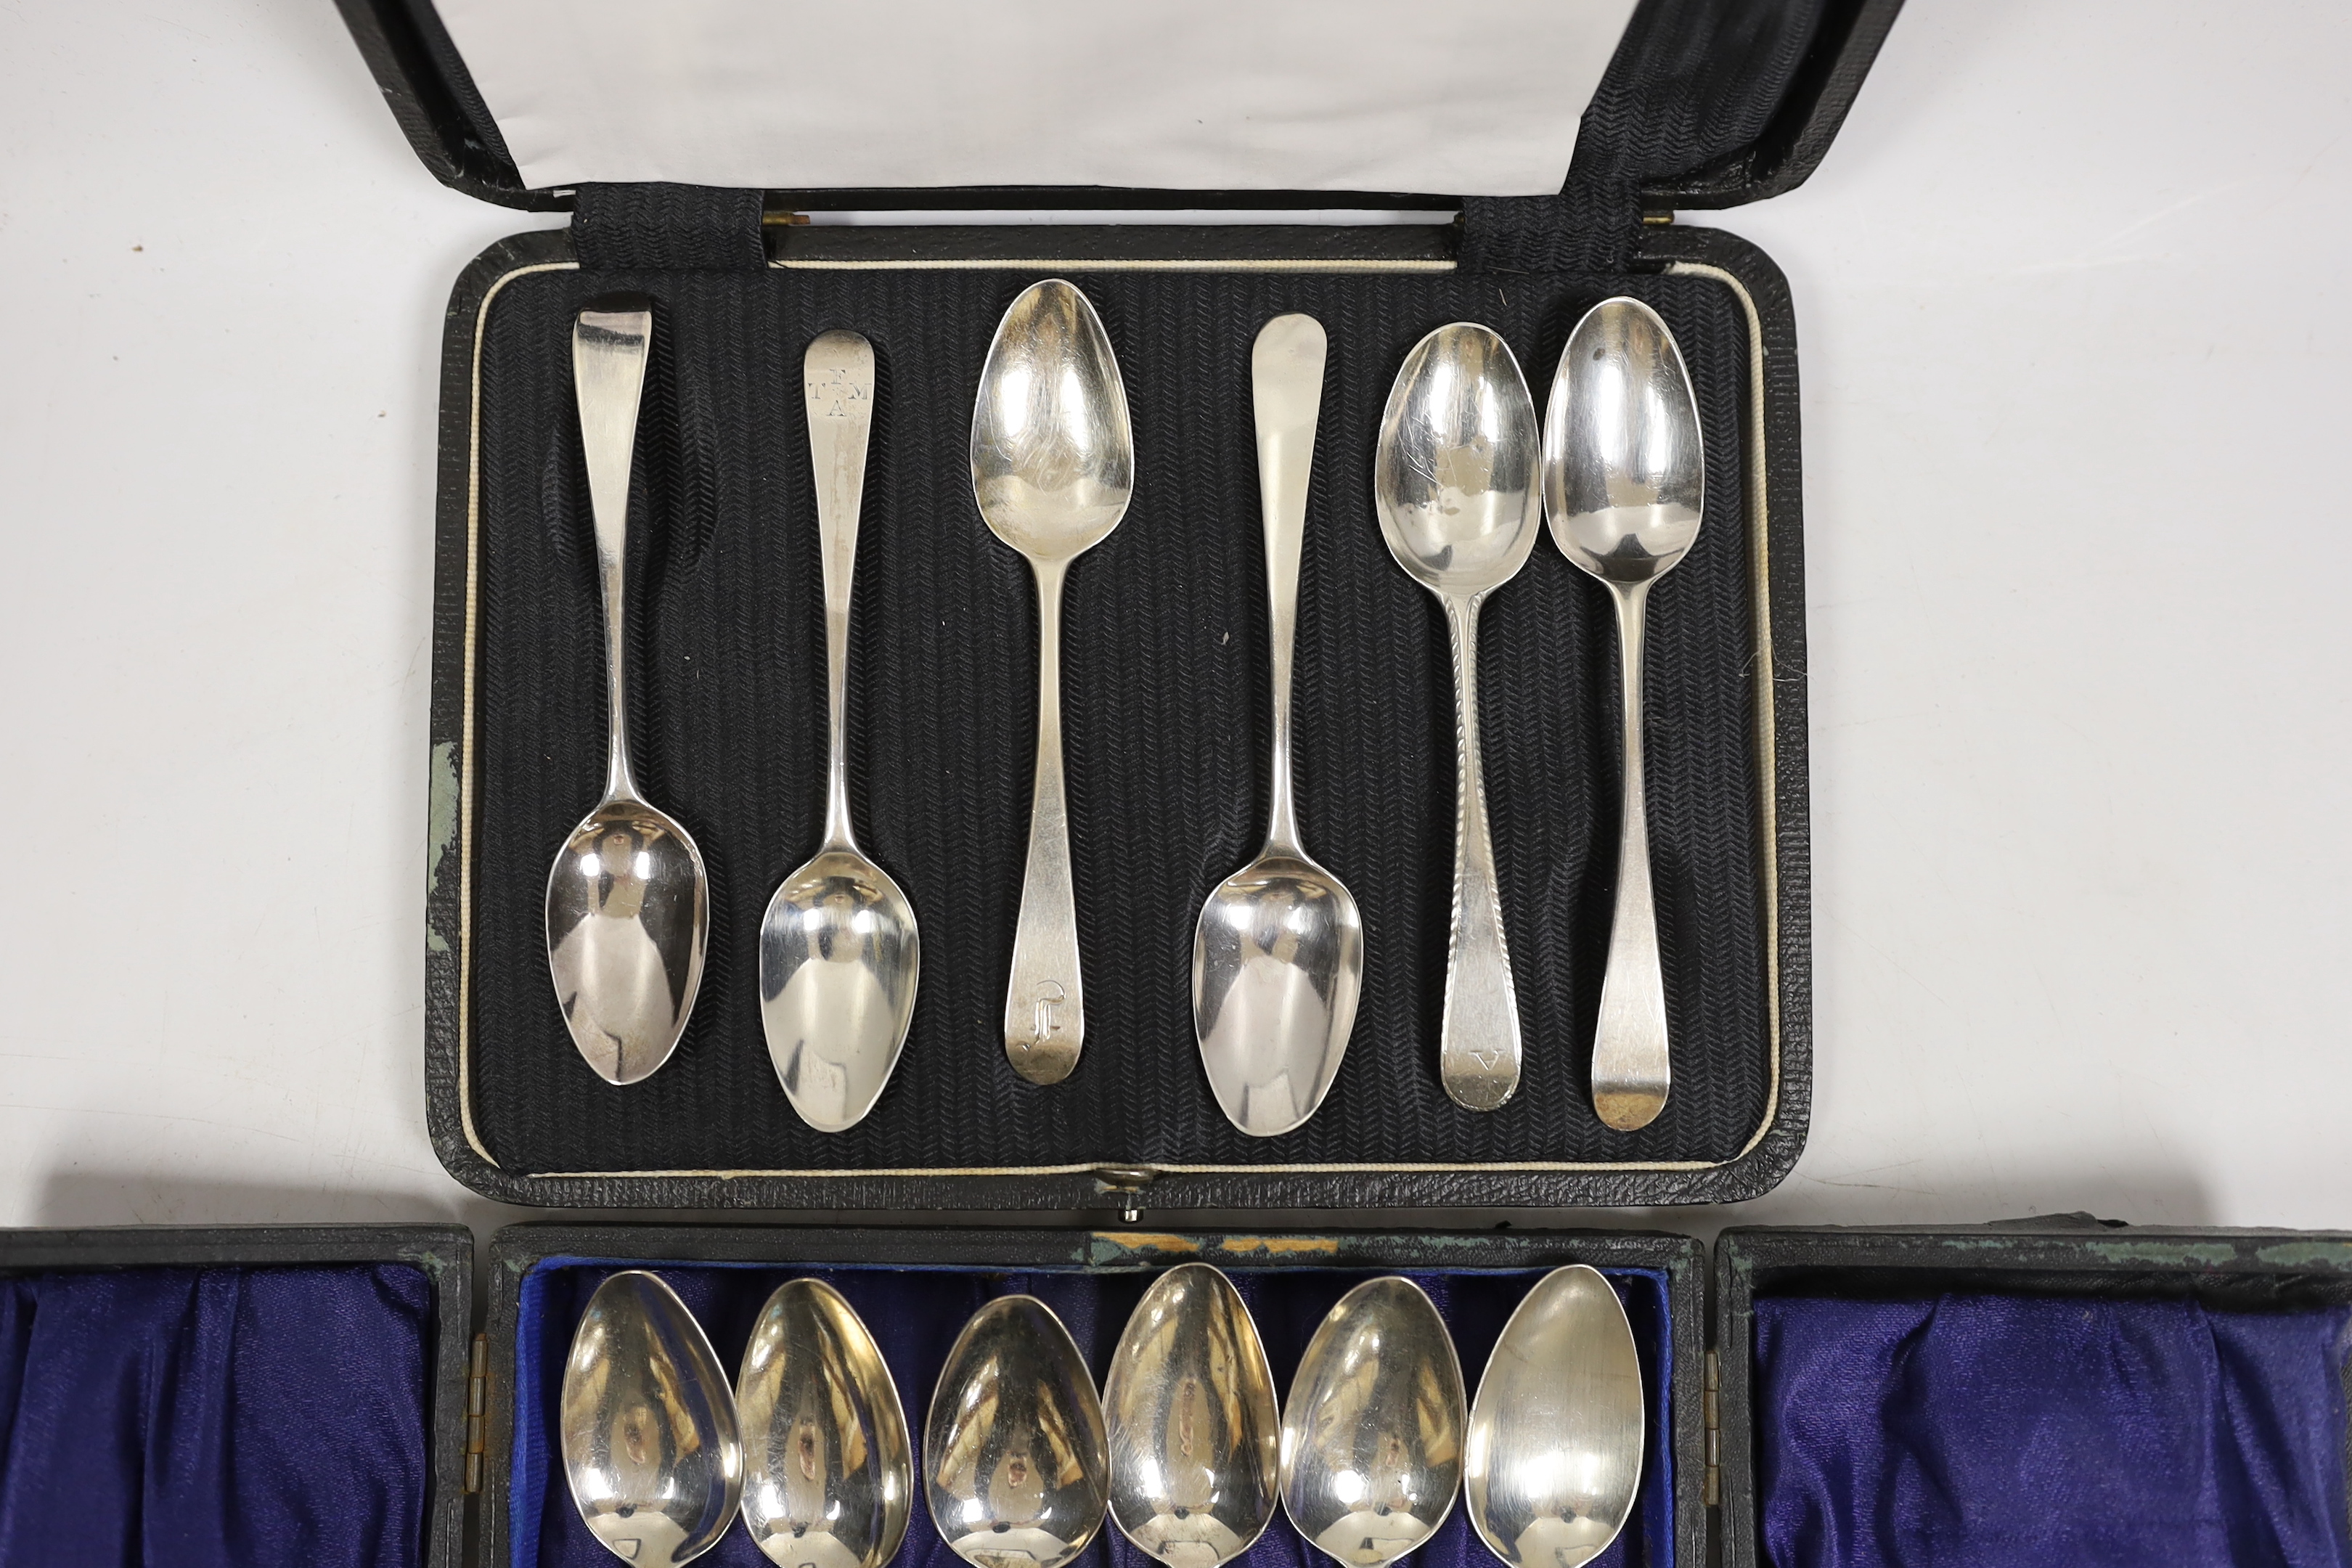 Six George III silver teaspoons by Hester Bateman, all different except one pair, London, 1787, together with a cased set of six George III silver Old English pattern teaspoons by Peter & William Bateman, London, 1813.